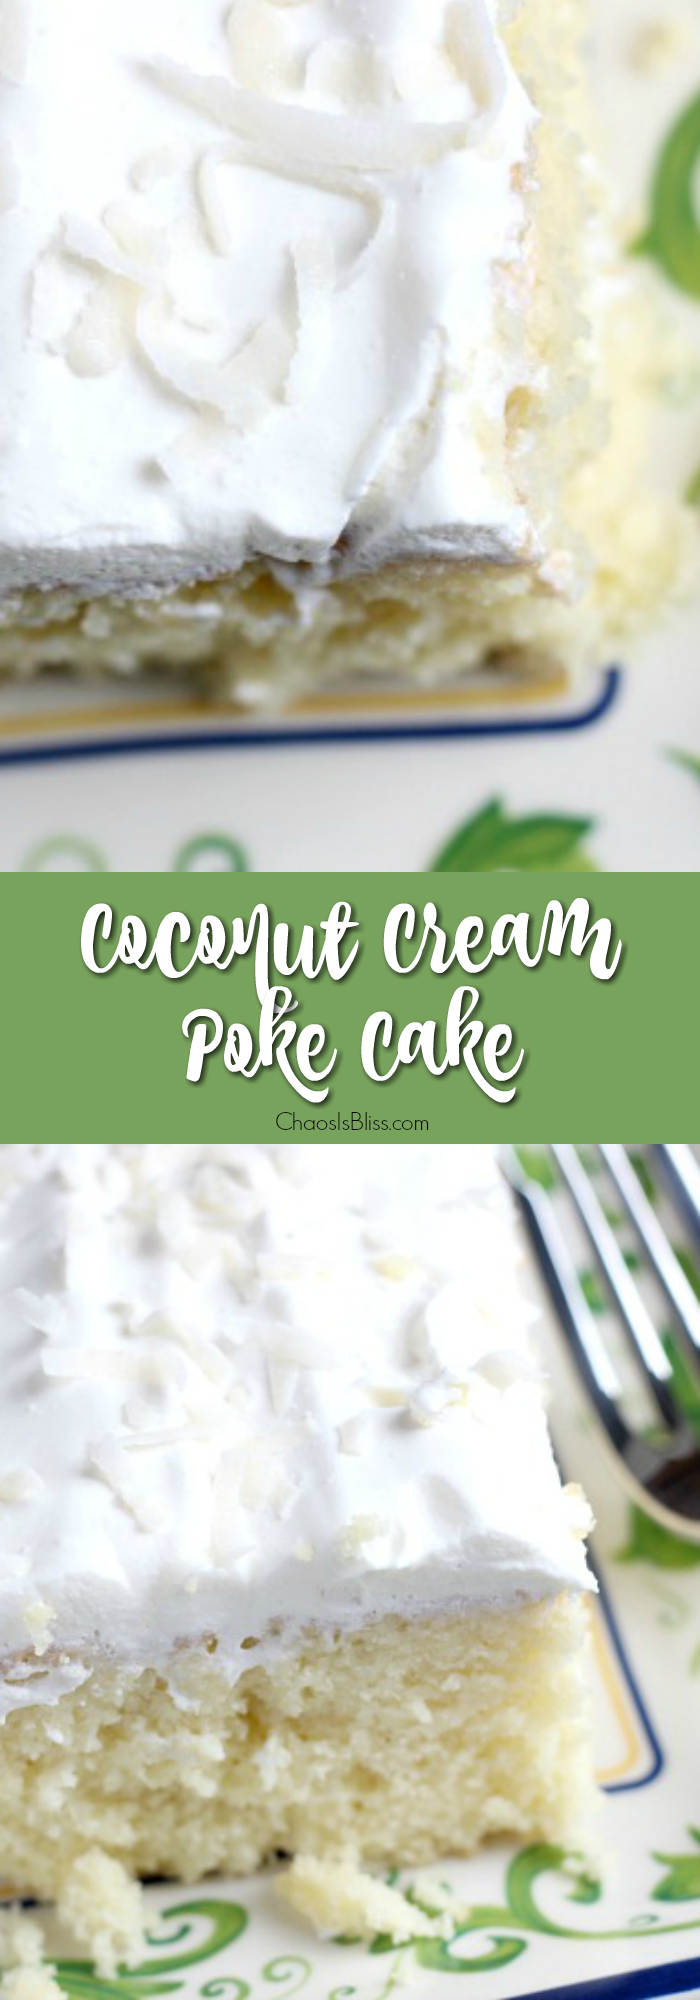 Light, moist and easy to make, this Coconut Cake poke cake recipe will be a favorite twist on a box cake mix recipe you'll savor all through the year!